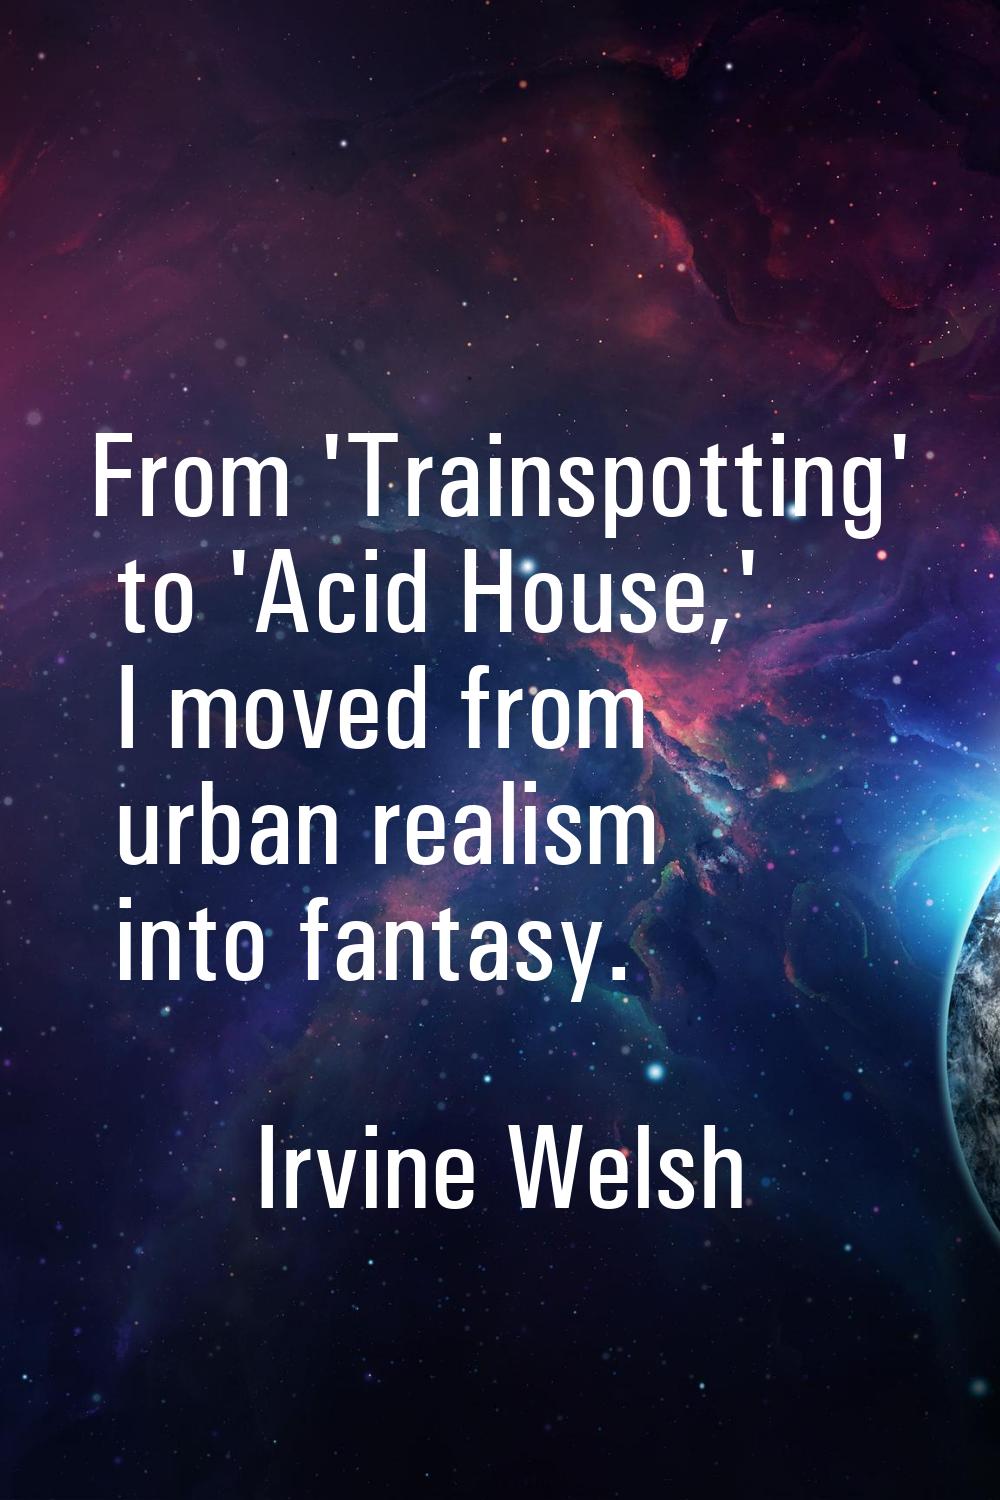 From 'Trainspotting' to 'Acid House,' I moved from urban realism into fantasy.